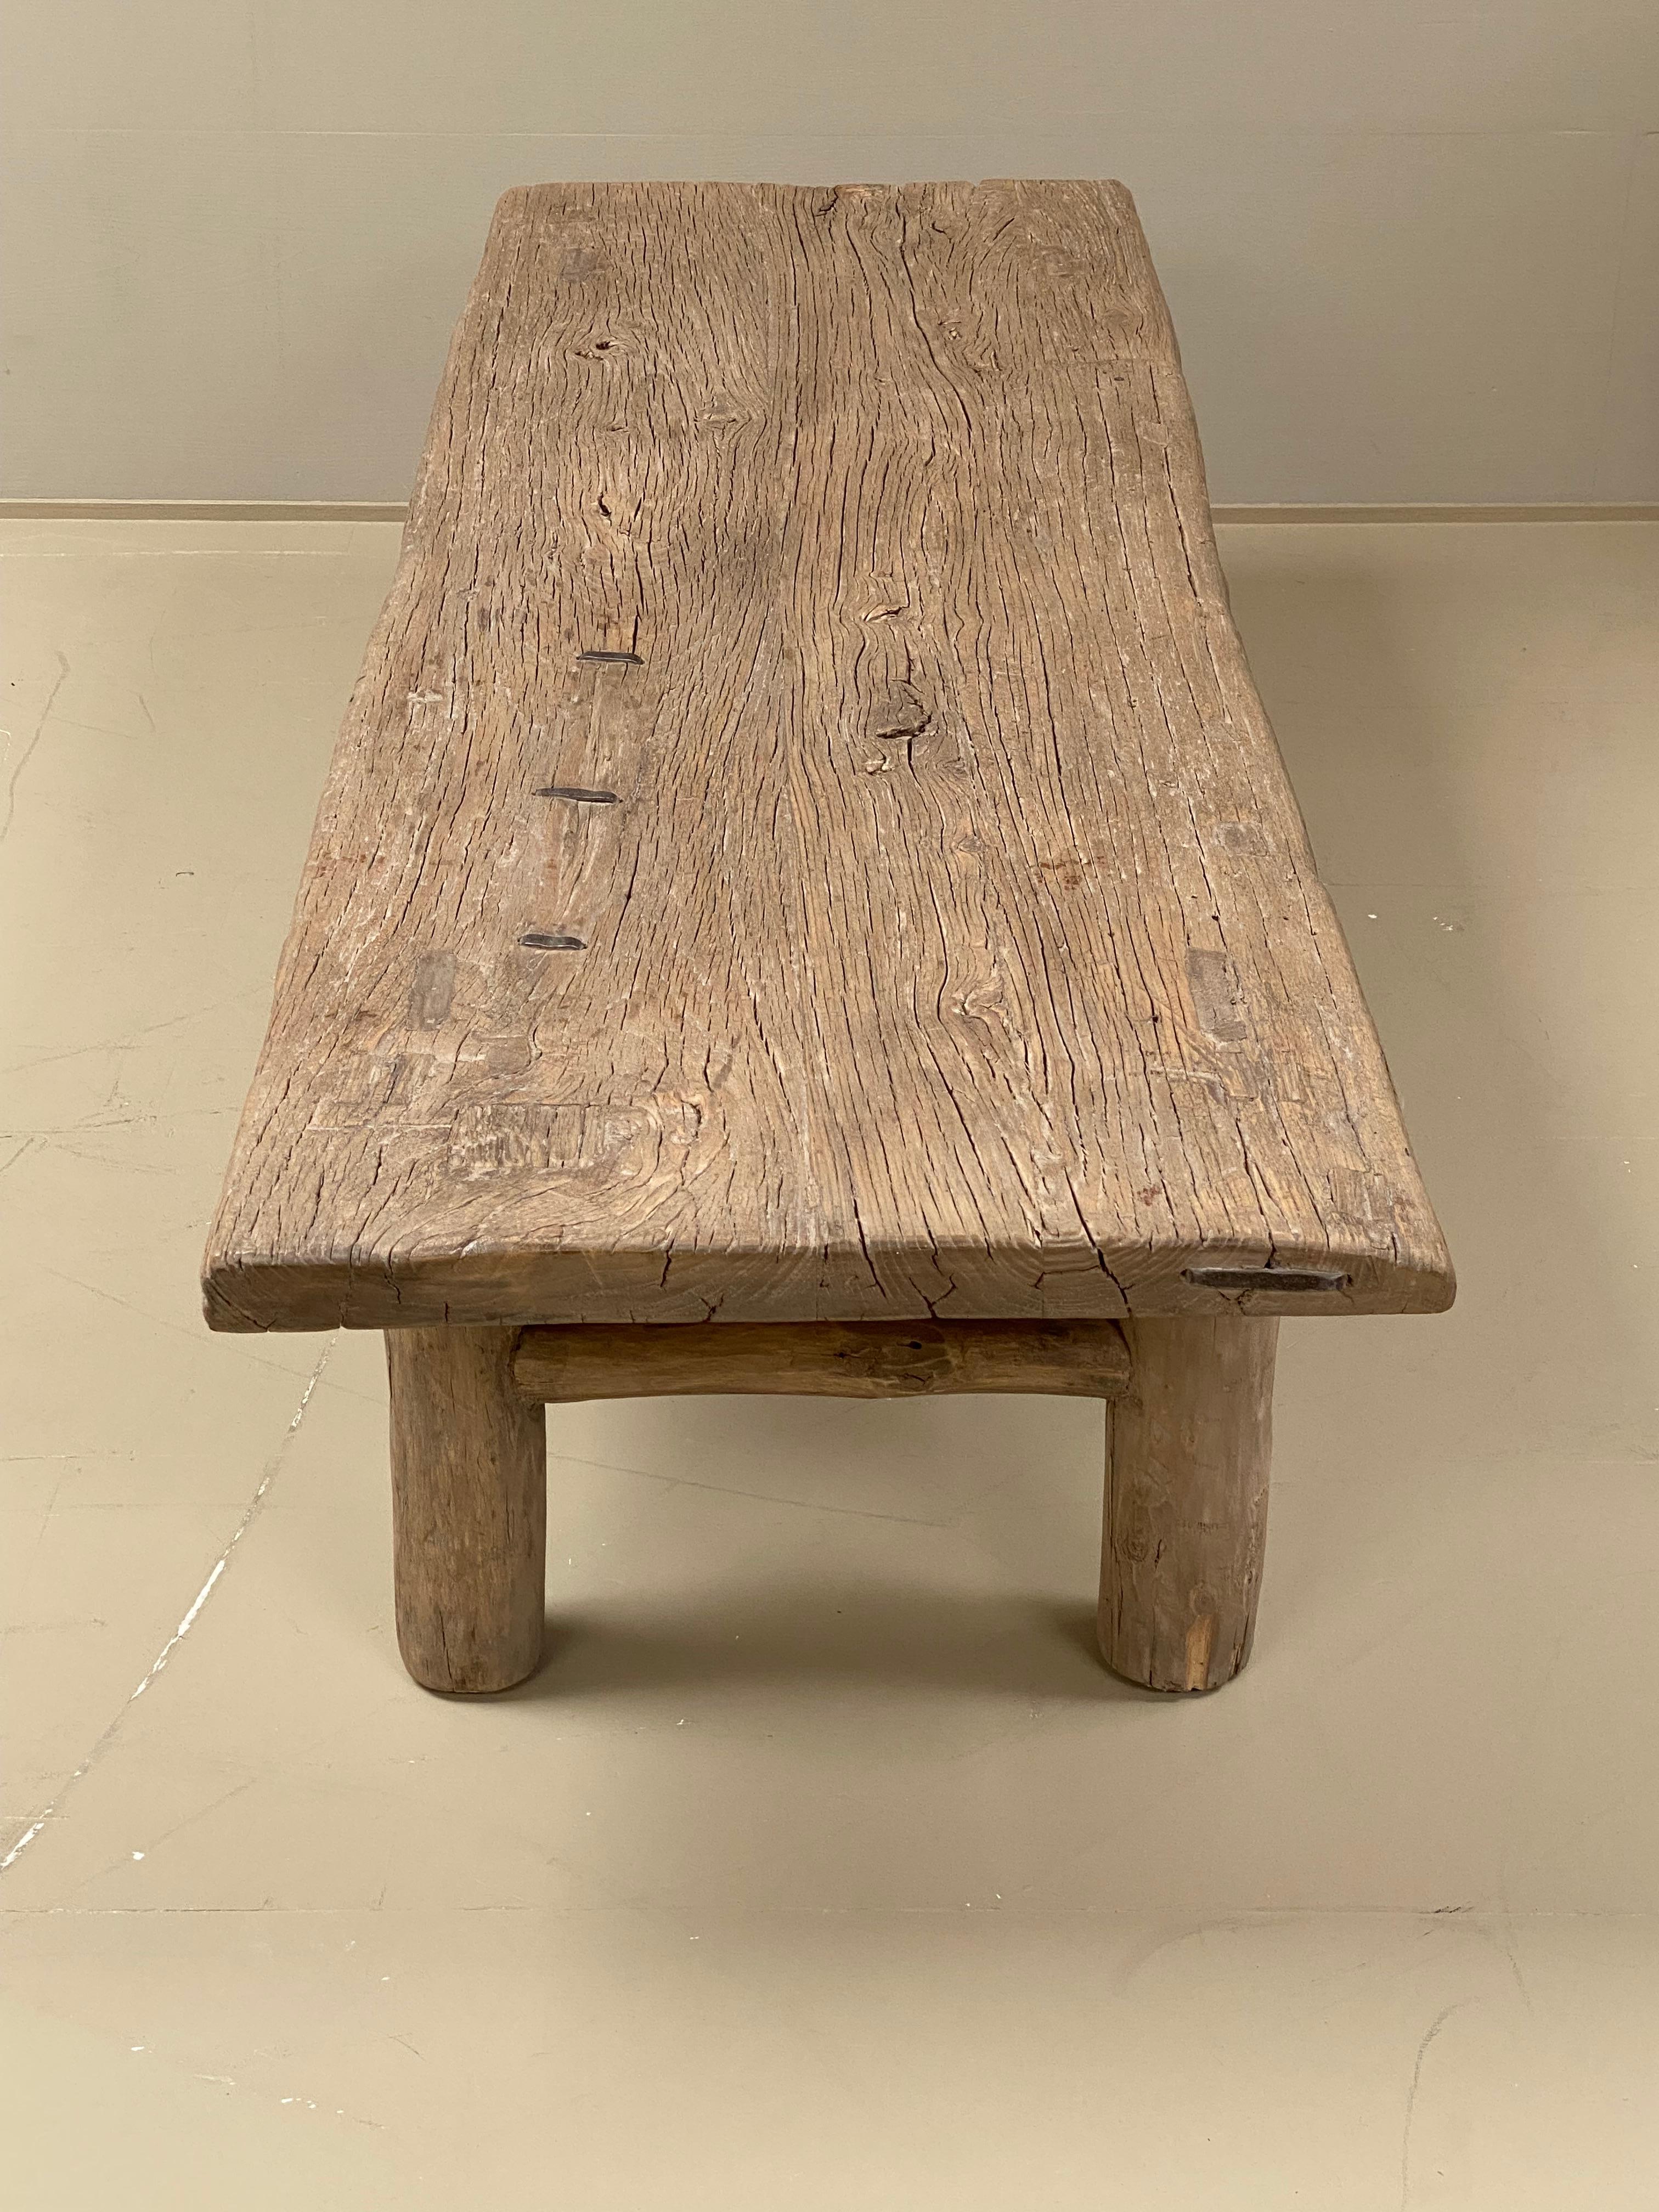 Brutalist Mid-Century Wooden Elm Rustic Coffee table from France, 1960s For Sale 5